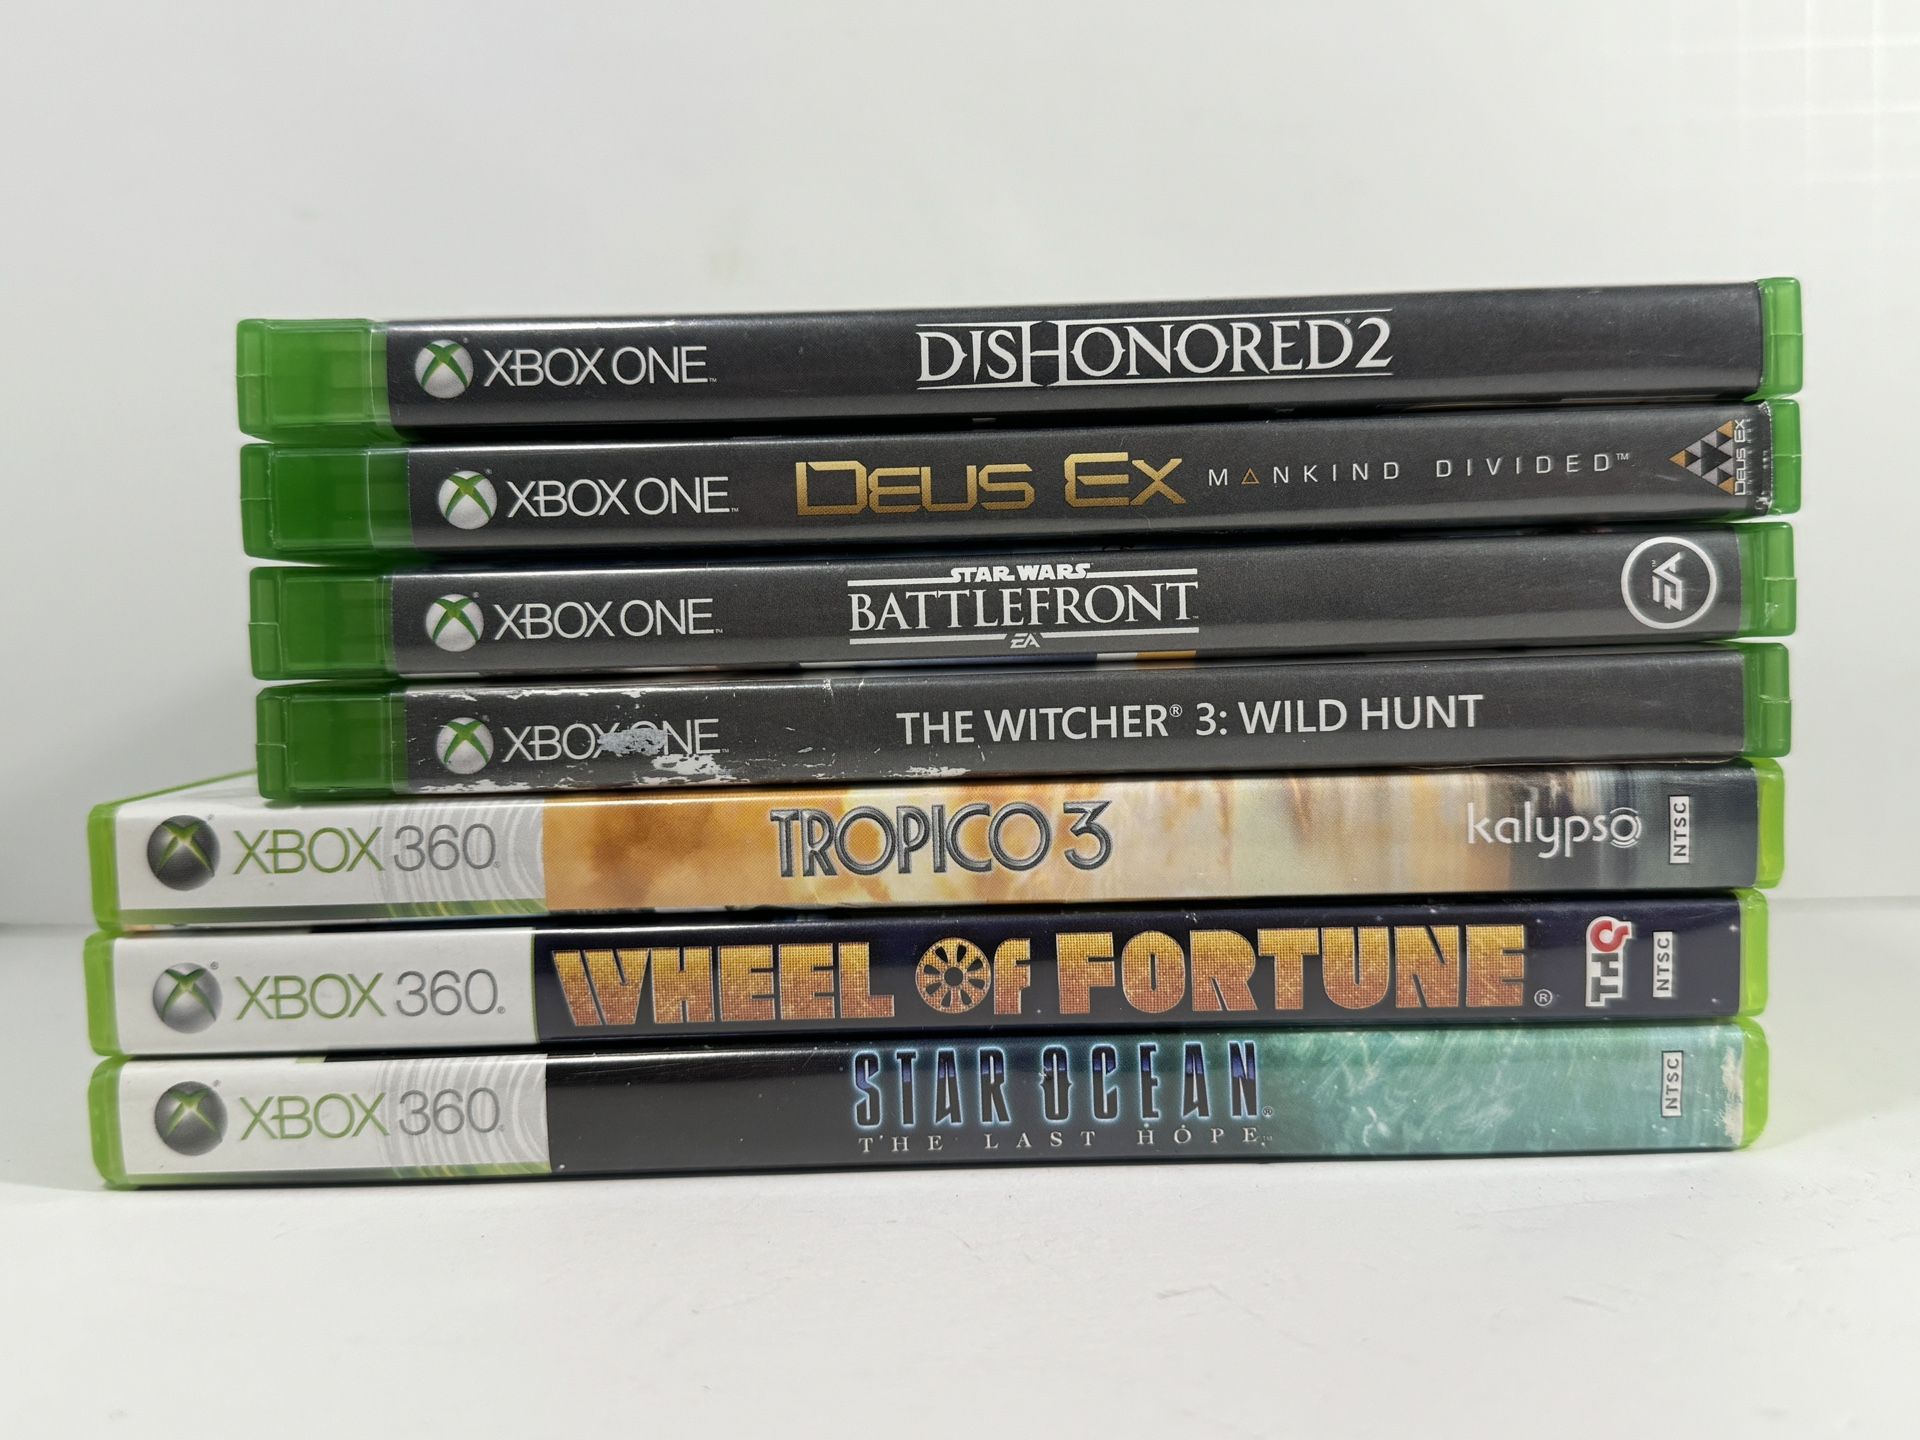 Xbox One 360 Game Lot • Star Wheel Tropical Witcher Battlefront Dues Ex Dishonor